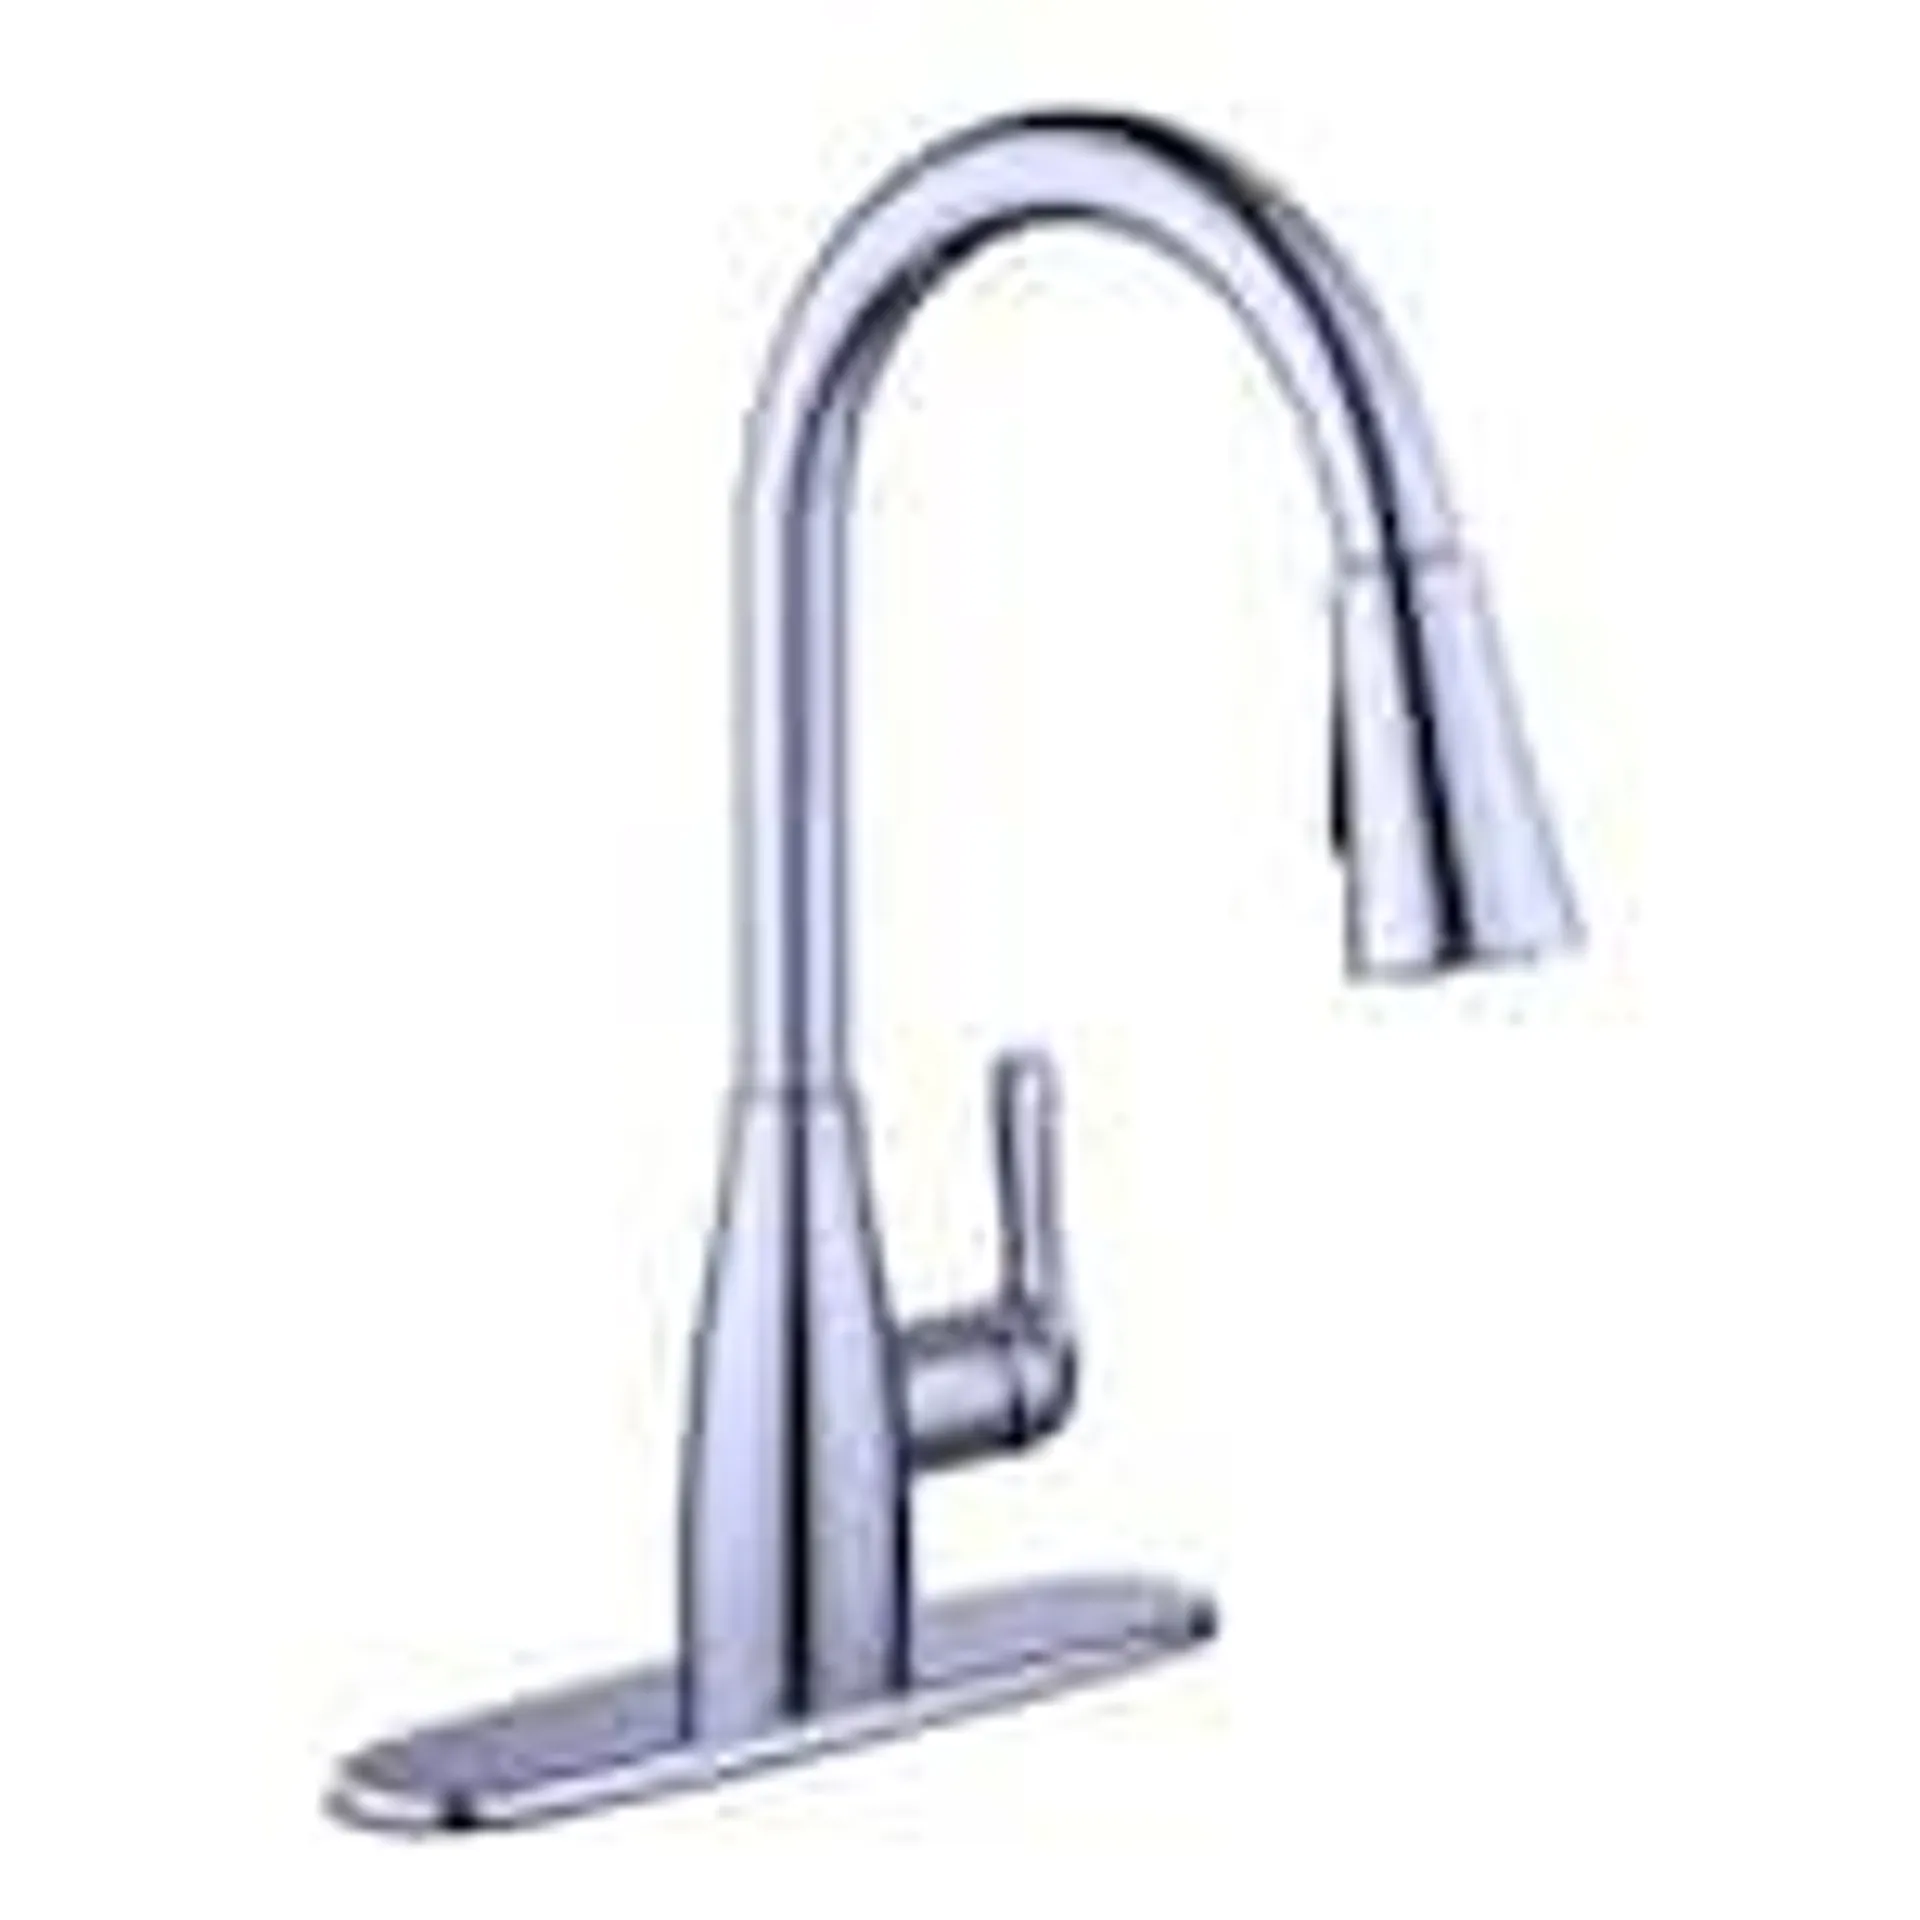 Glacier Bay McKenna Single-Handle Pull-Down Kitchen with TurboSpray and FastMount Faucet Sprayer in Polished Chrome